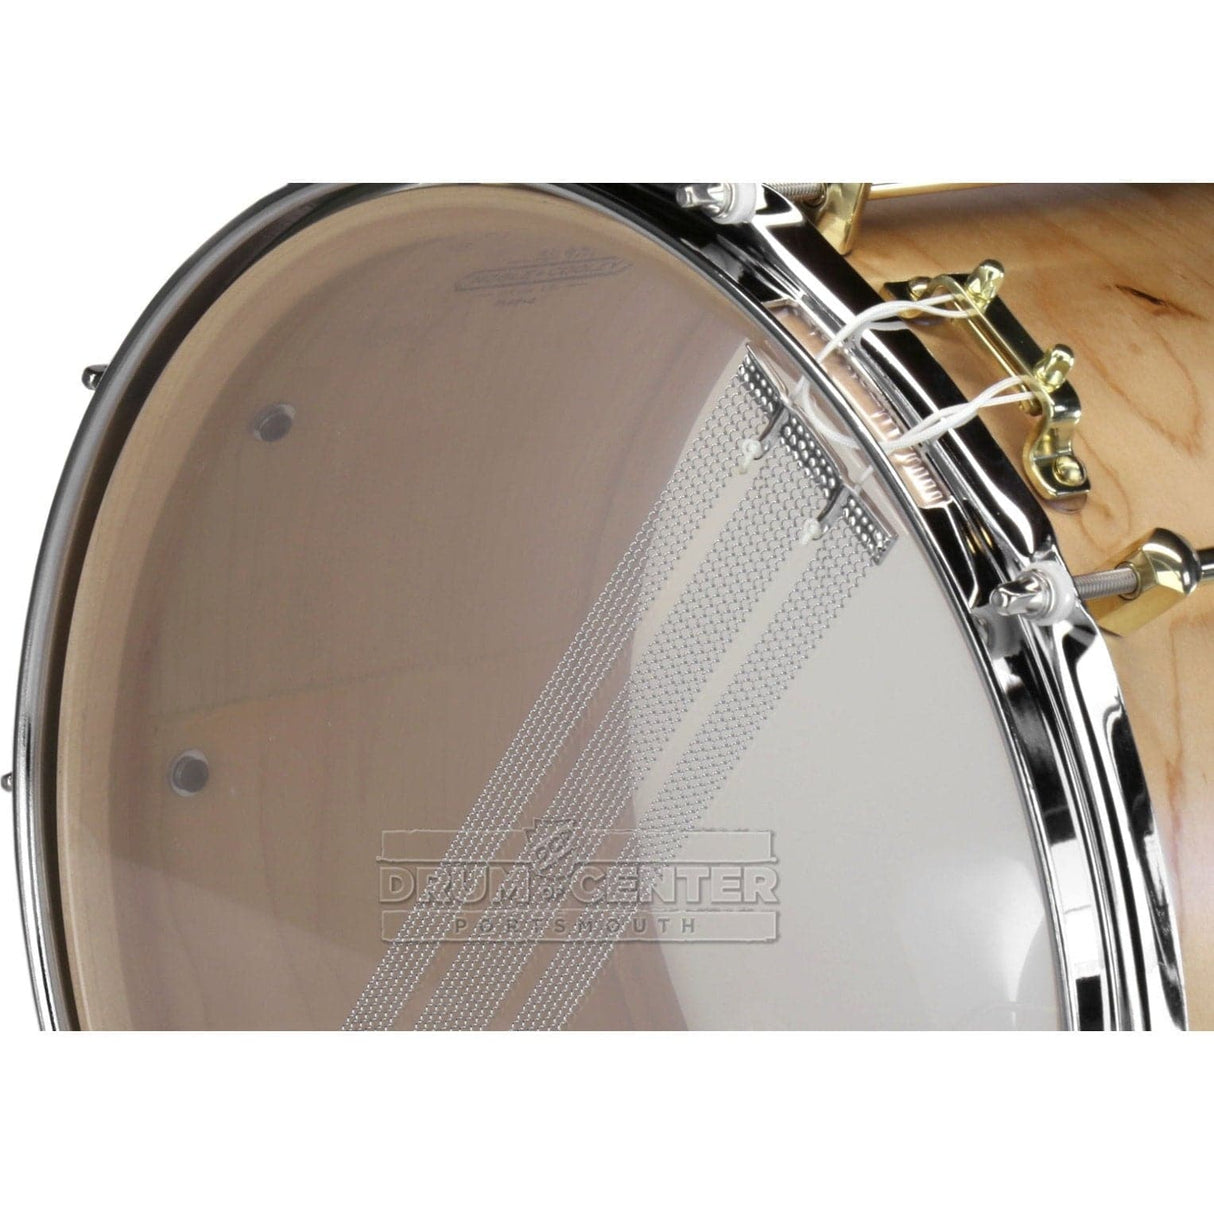 Noble & Cooley Solid Shell Classic Maple Snare Drum 14x8 Natural Oil